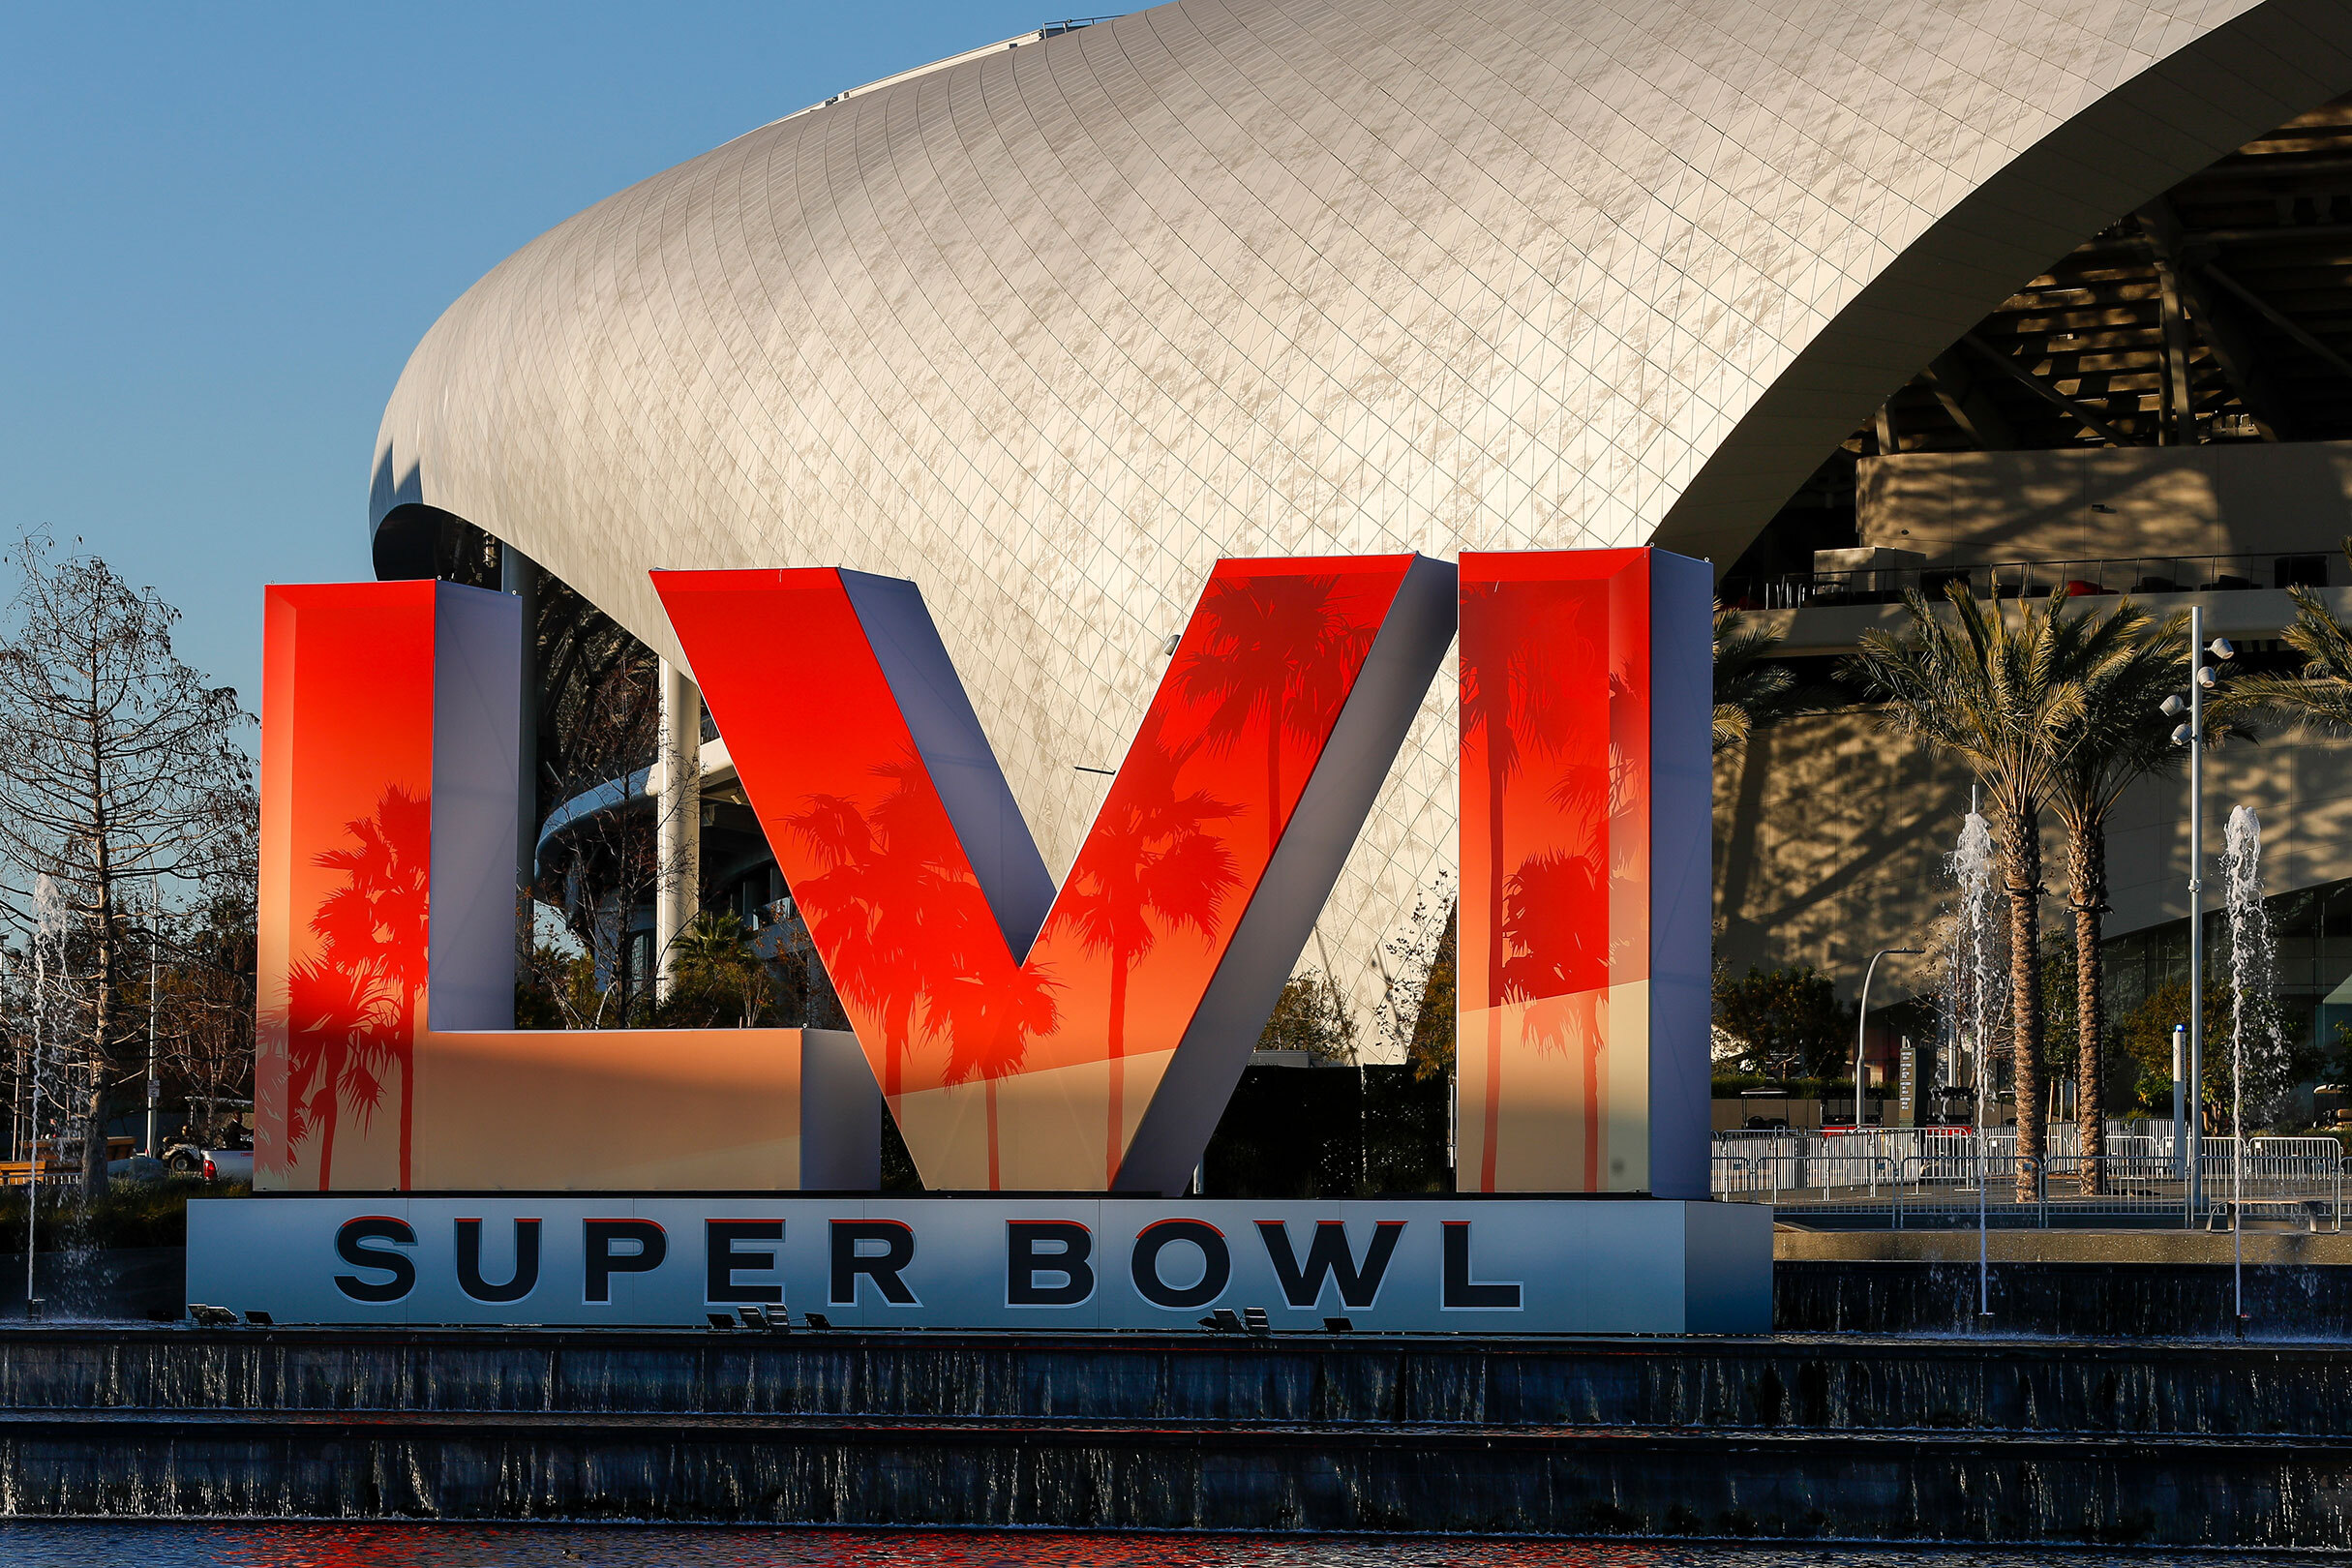 where i can watch the super bowl 2022